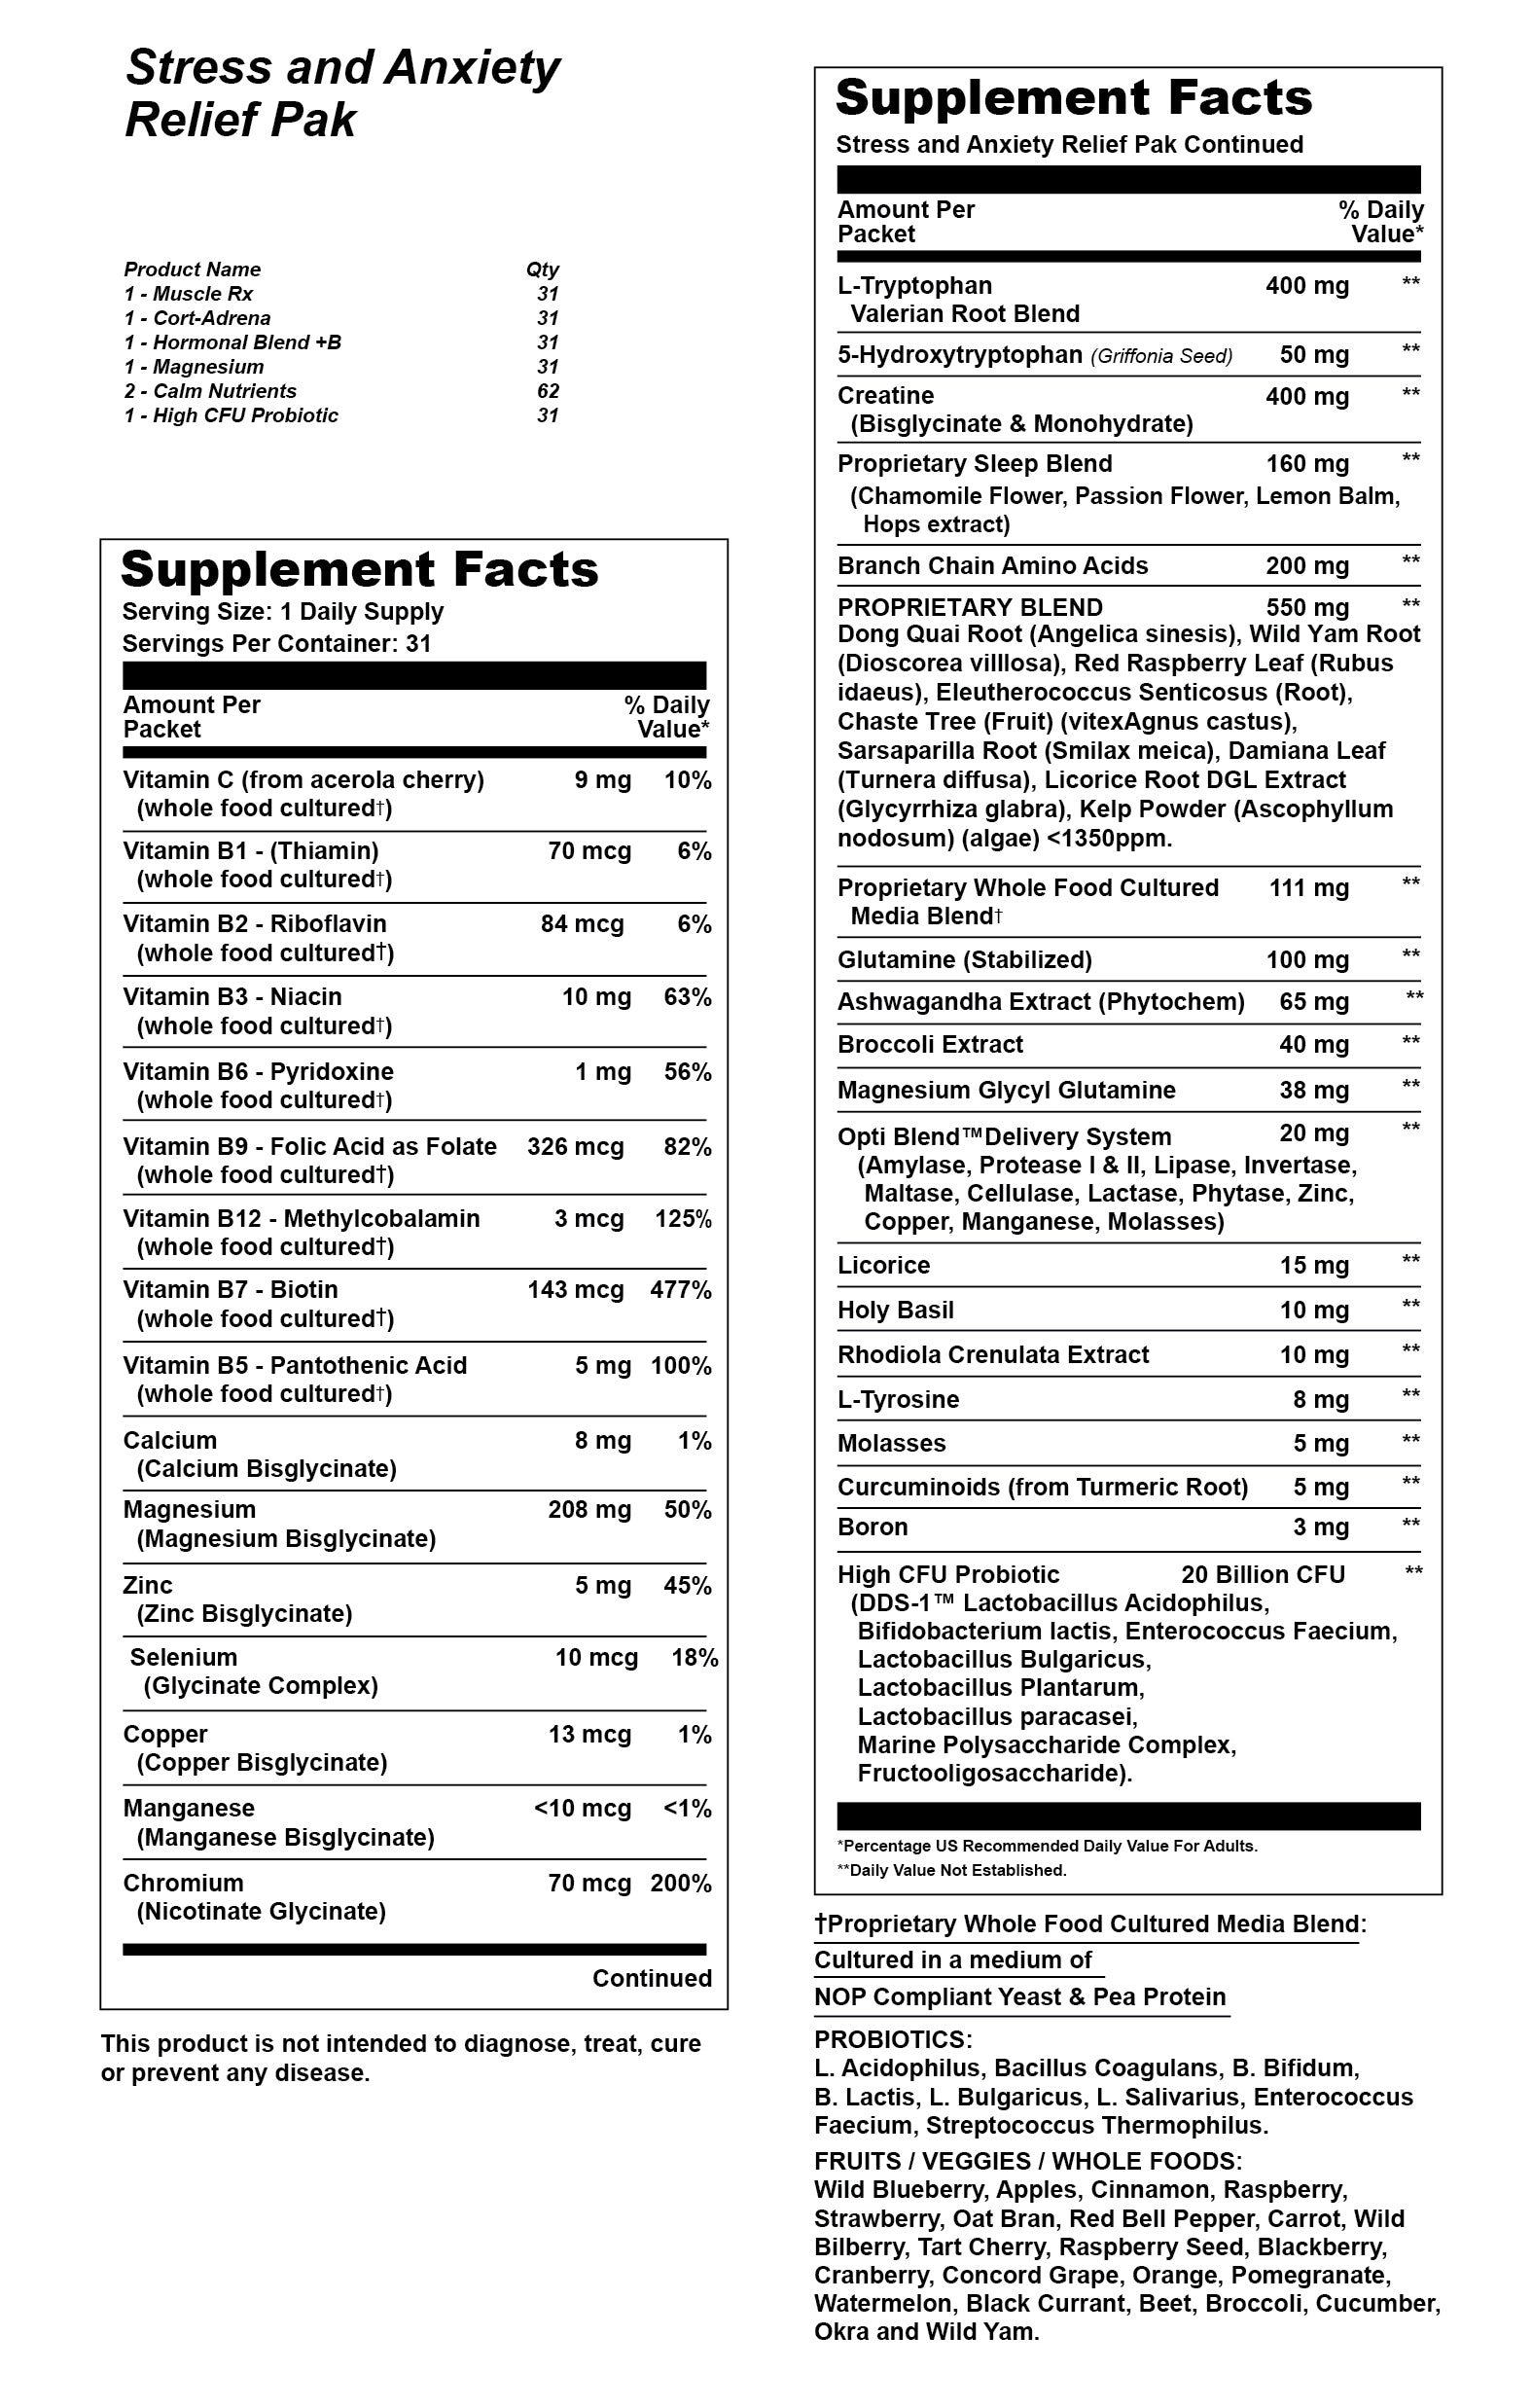 Stress/Anxiety Relief Pak (31 Paks) Supplement Facts